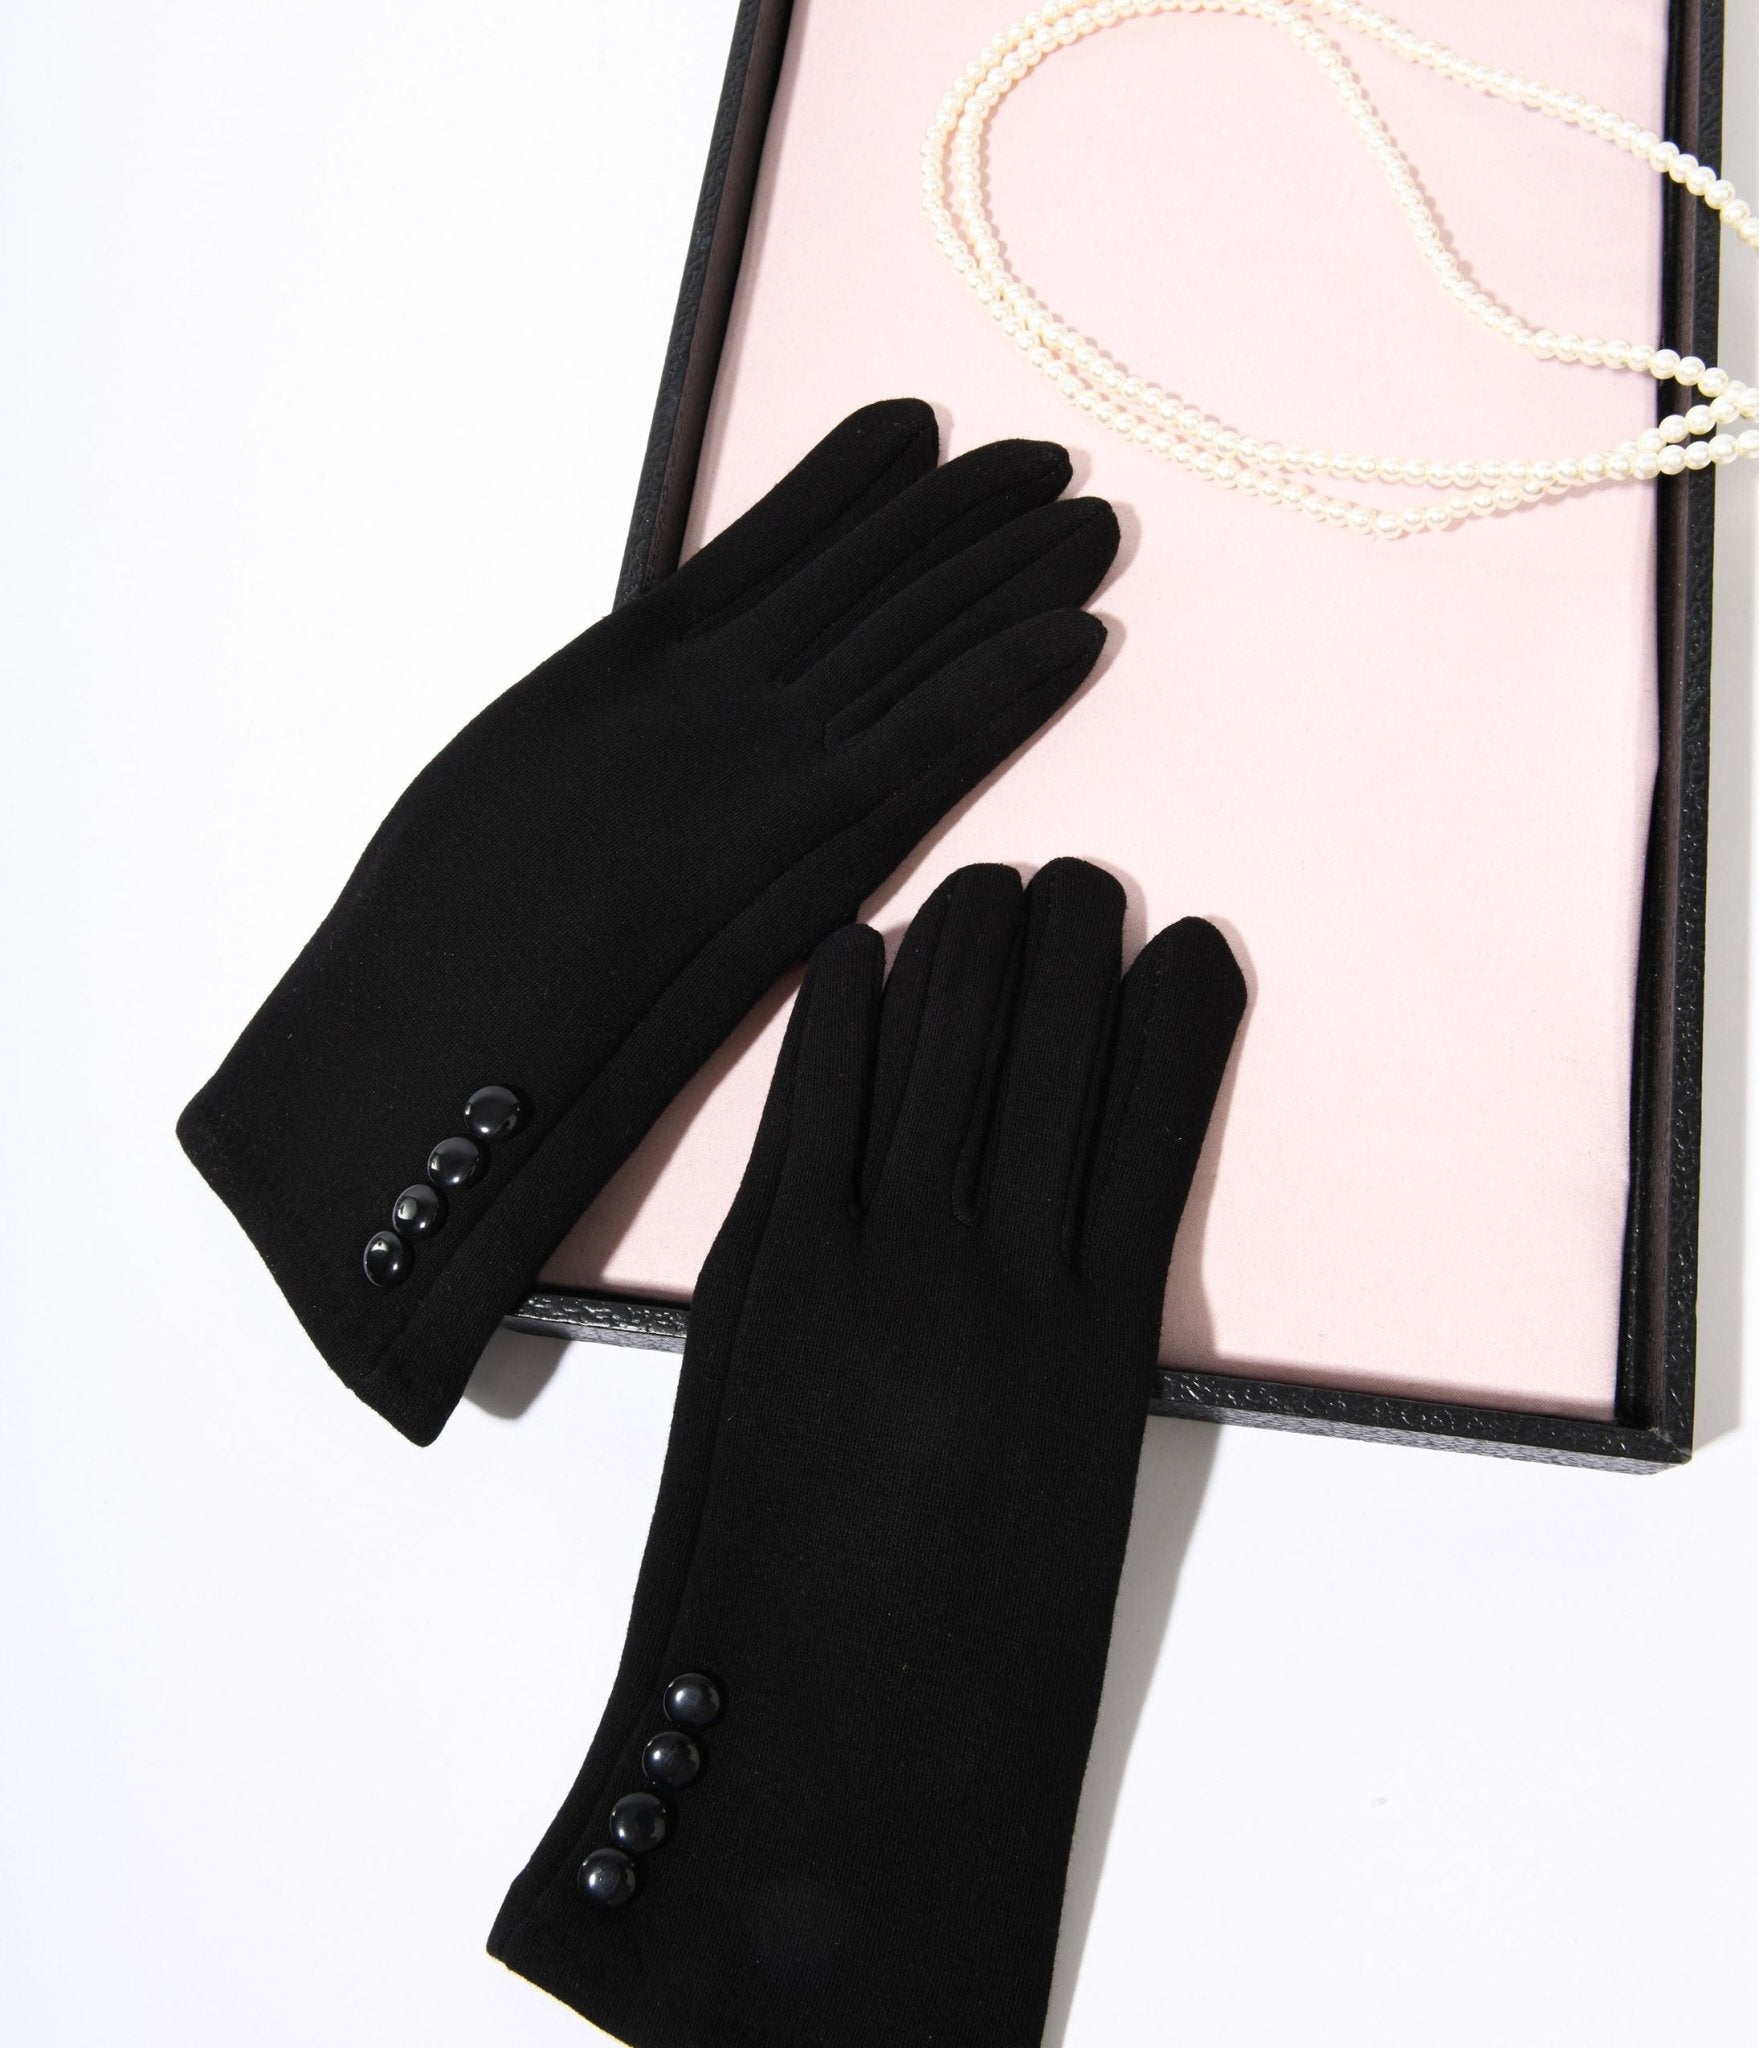 

Black Wrist Length Buttons Texting Gloves